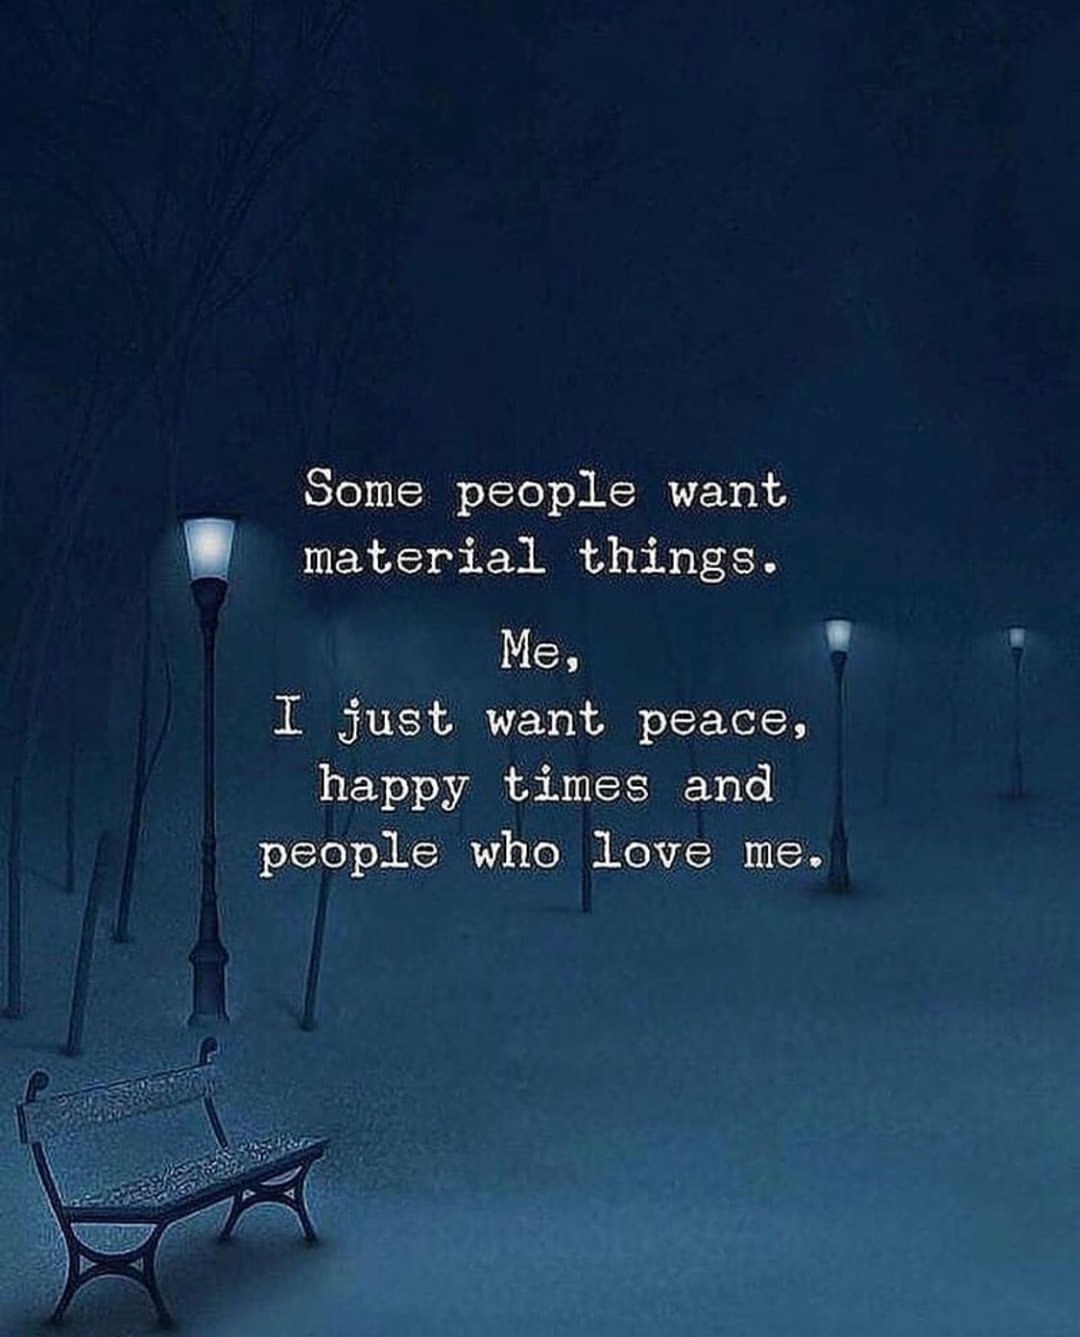 Some people want material things. I just want peace, happy times and people who love me.